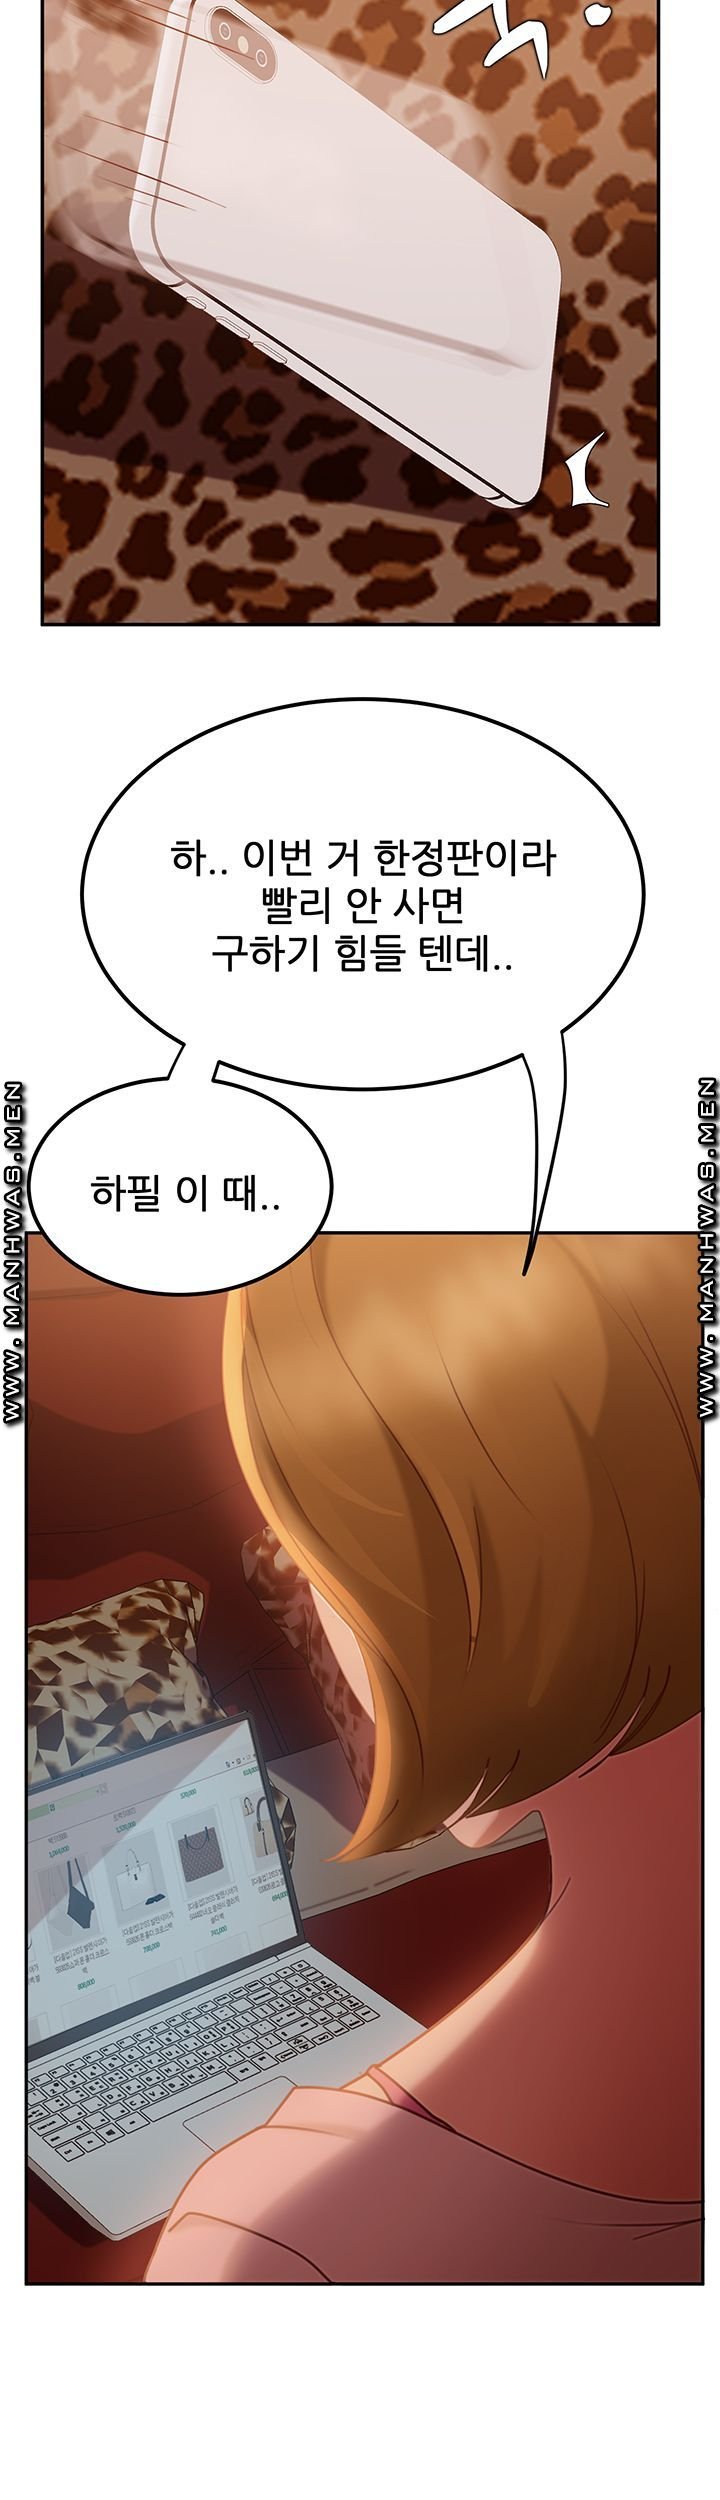 a-twisted-day-raw-chap-3-34